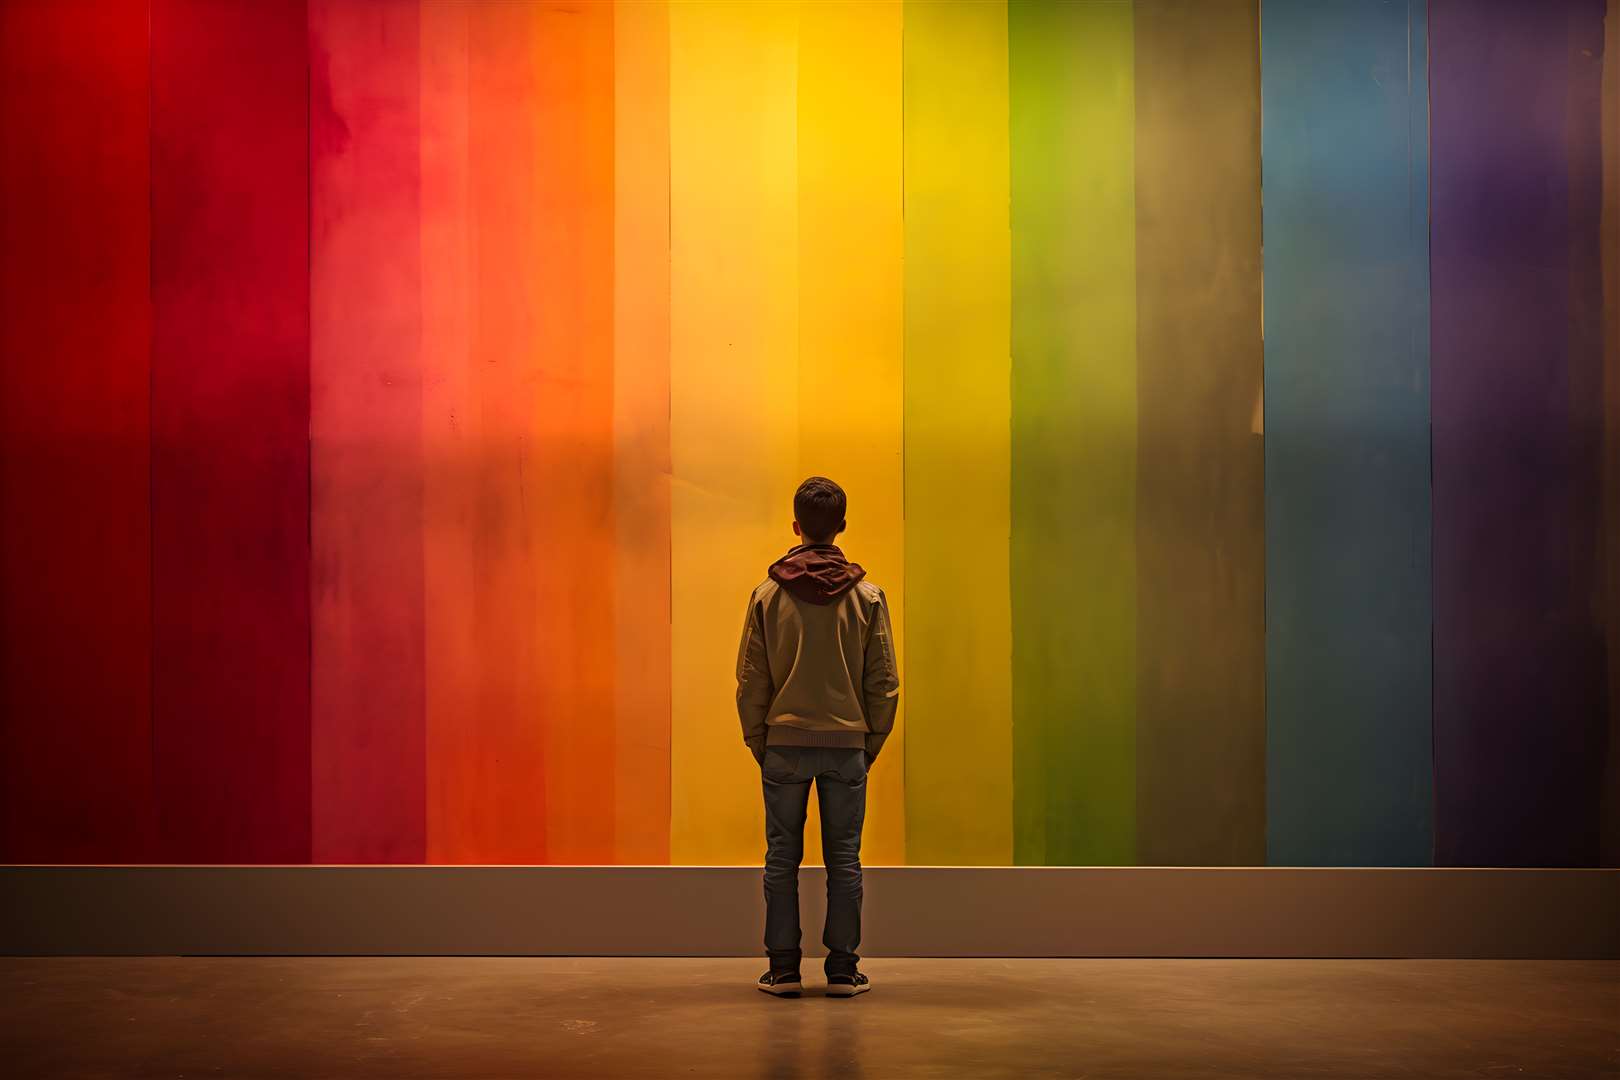 LGBTQ+ people are still excluded from many areas of every day life. Picture: Callum Mackay (generated by AI)